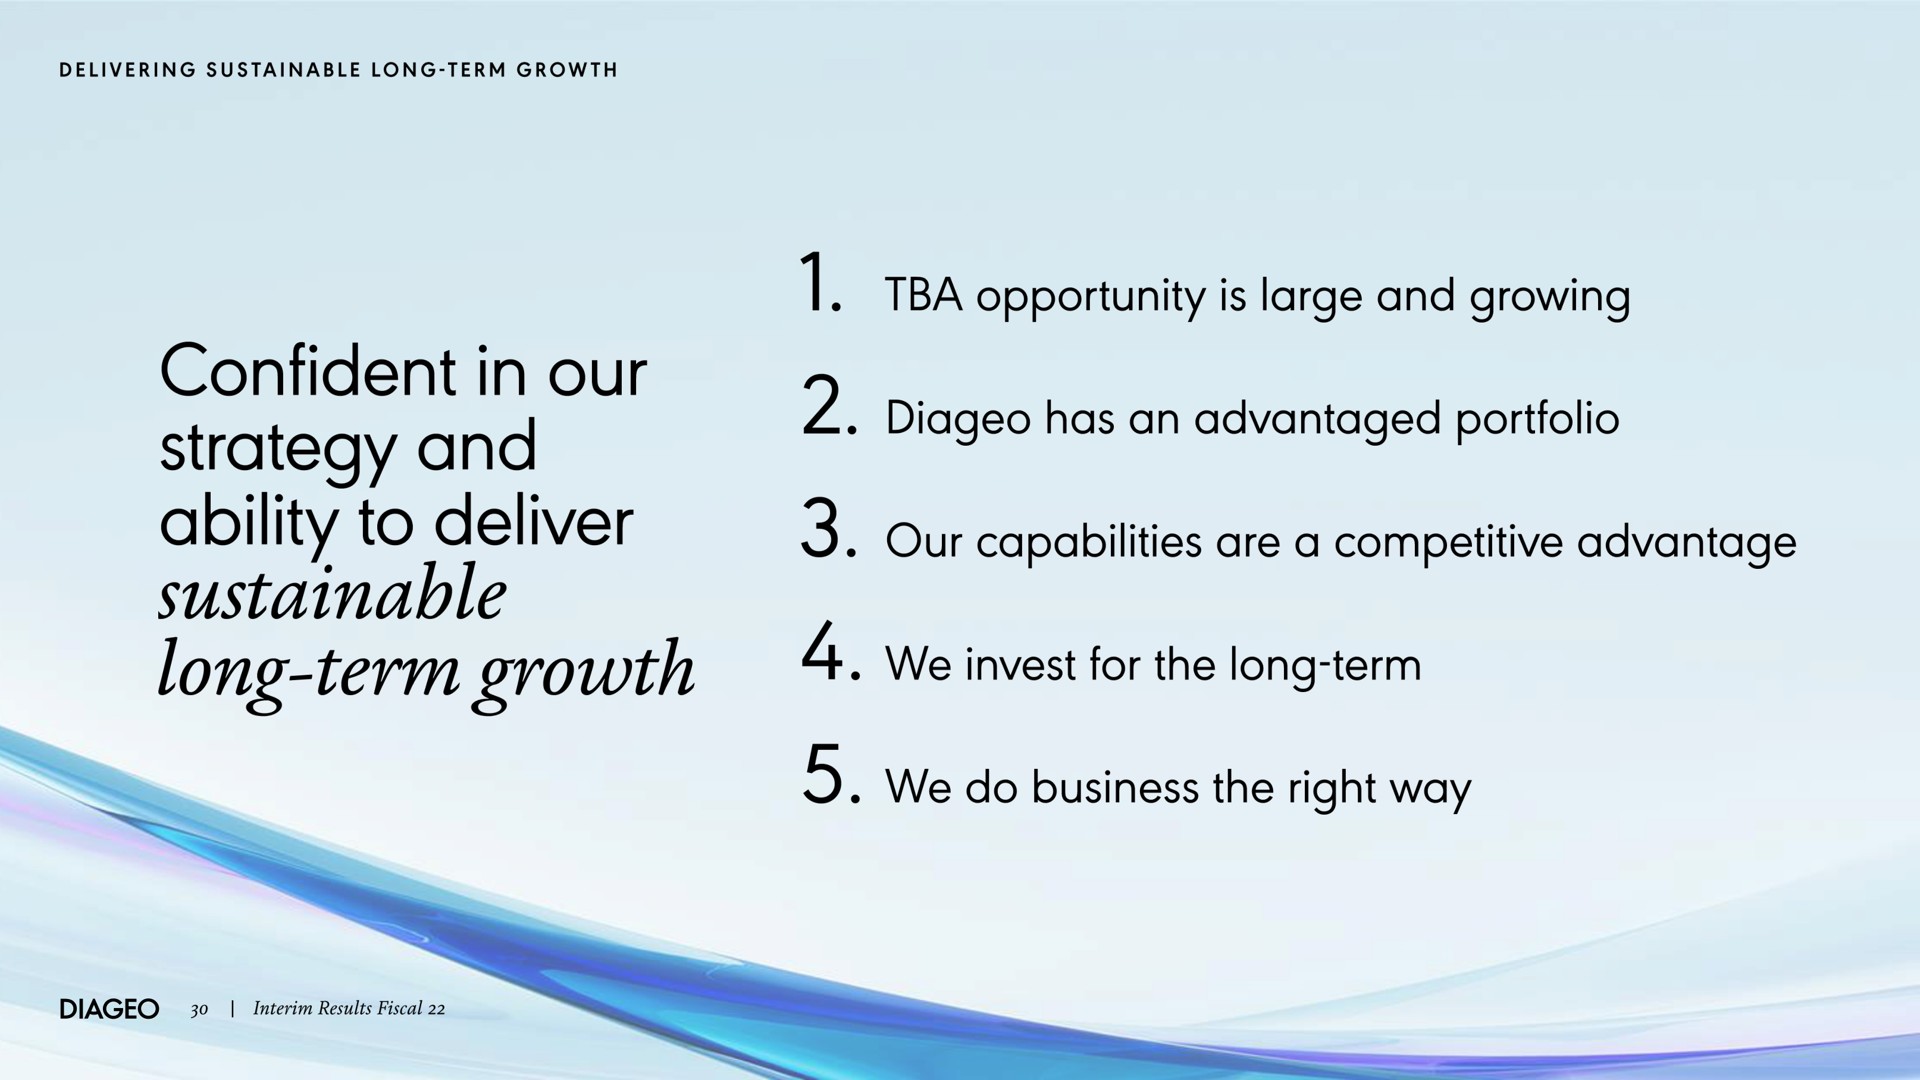 confident in our strategy and ability to deliver sustainable long term growth opportunity is large and growing has an advantaged portfolio our capabilities are a competitive advantage we invest for the long term we do business the right way | Diageo